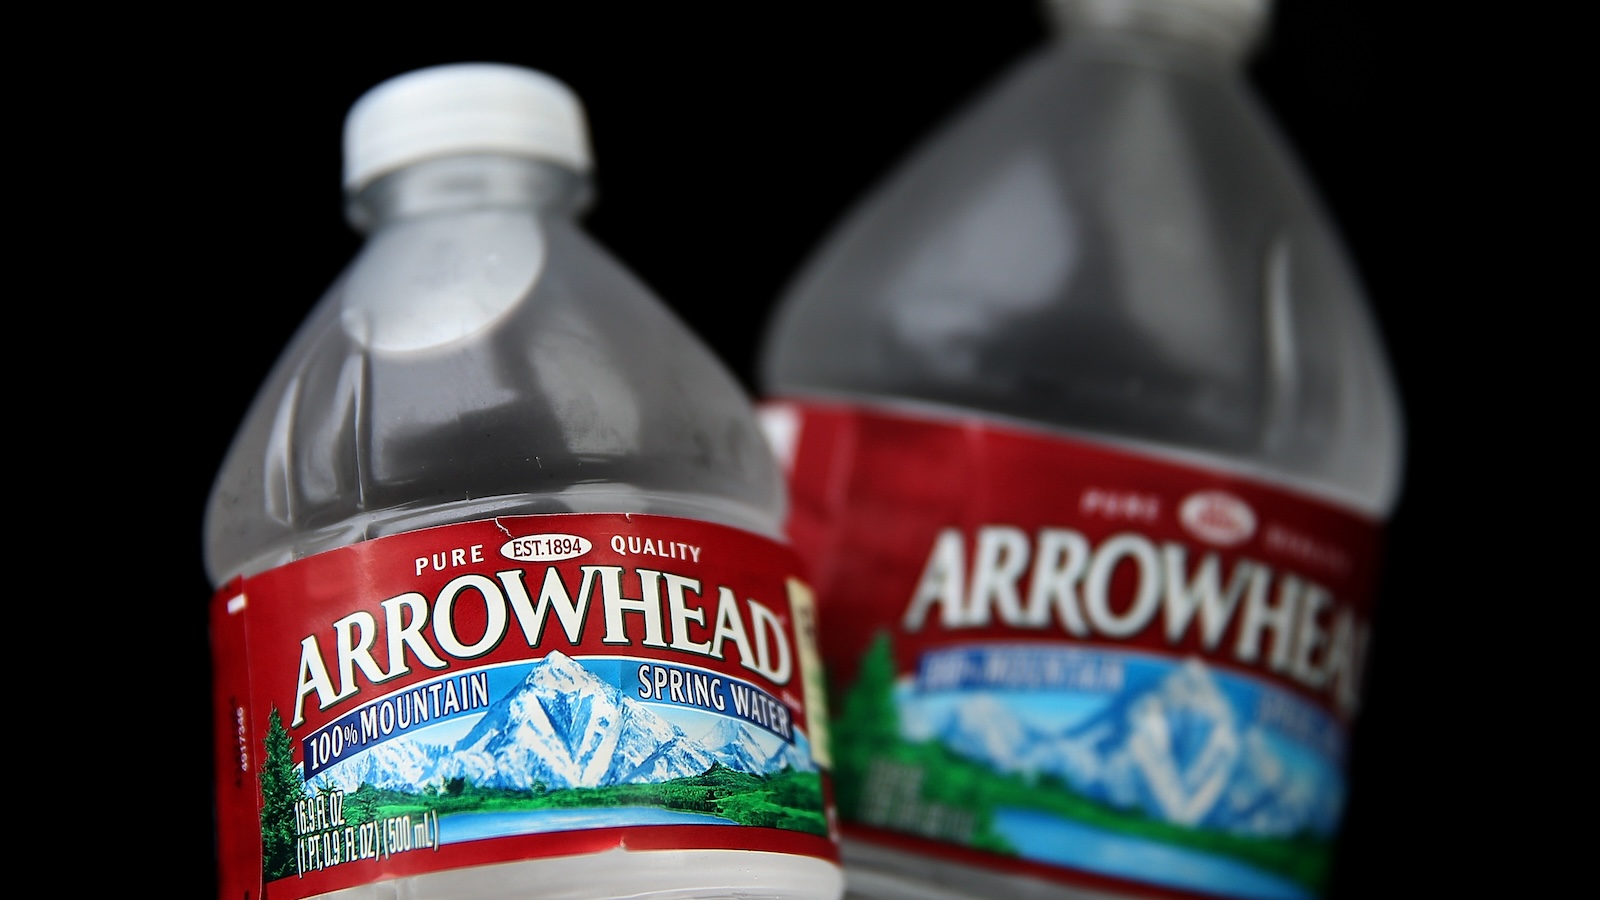 Two bottles of Arrowhead water against a black background. Labels read 100% Mountain Spring Water